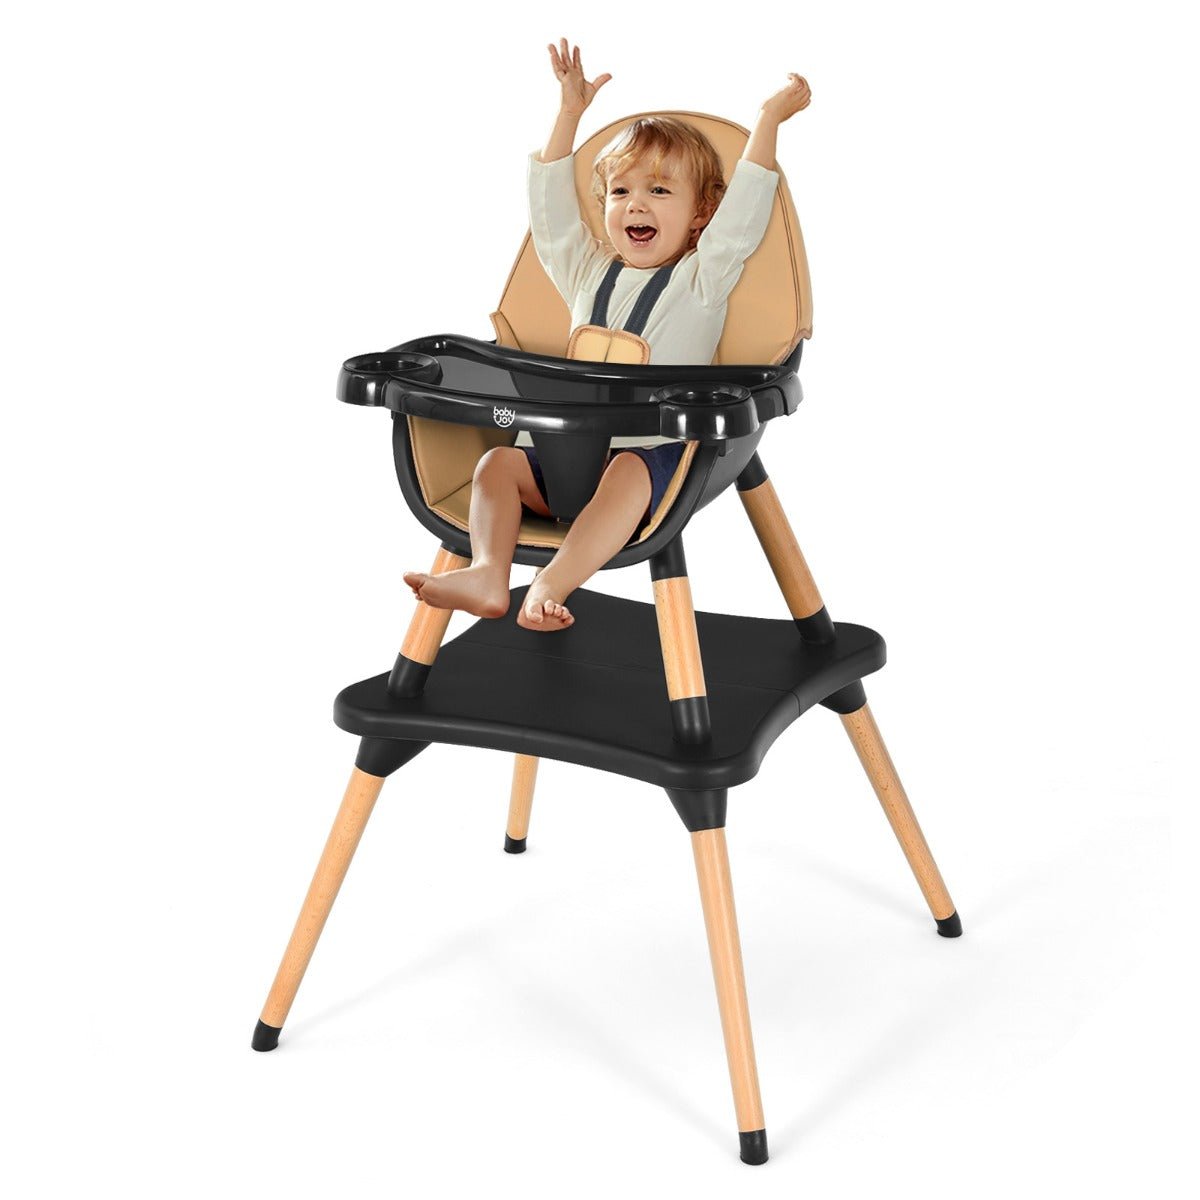 Coffee Toddler High Chair - 5-in-1 Convertible Wooden Seating